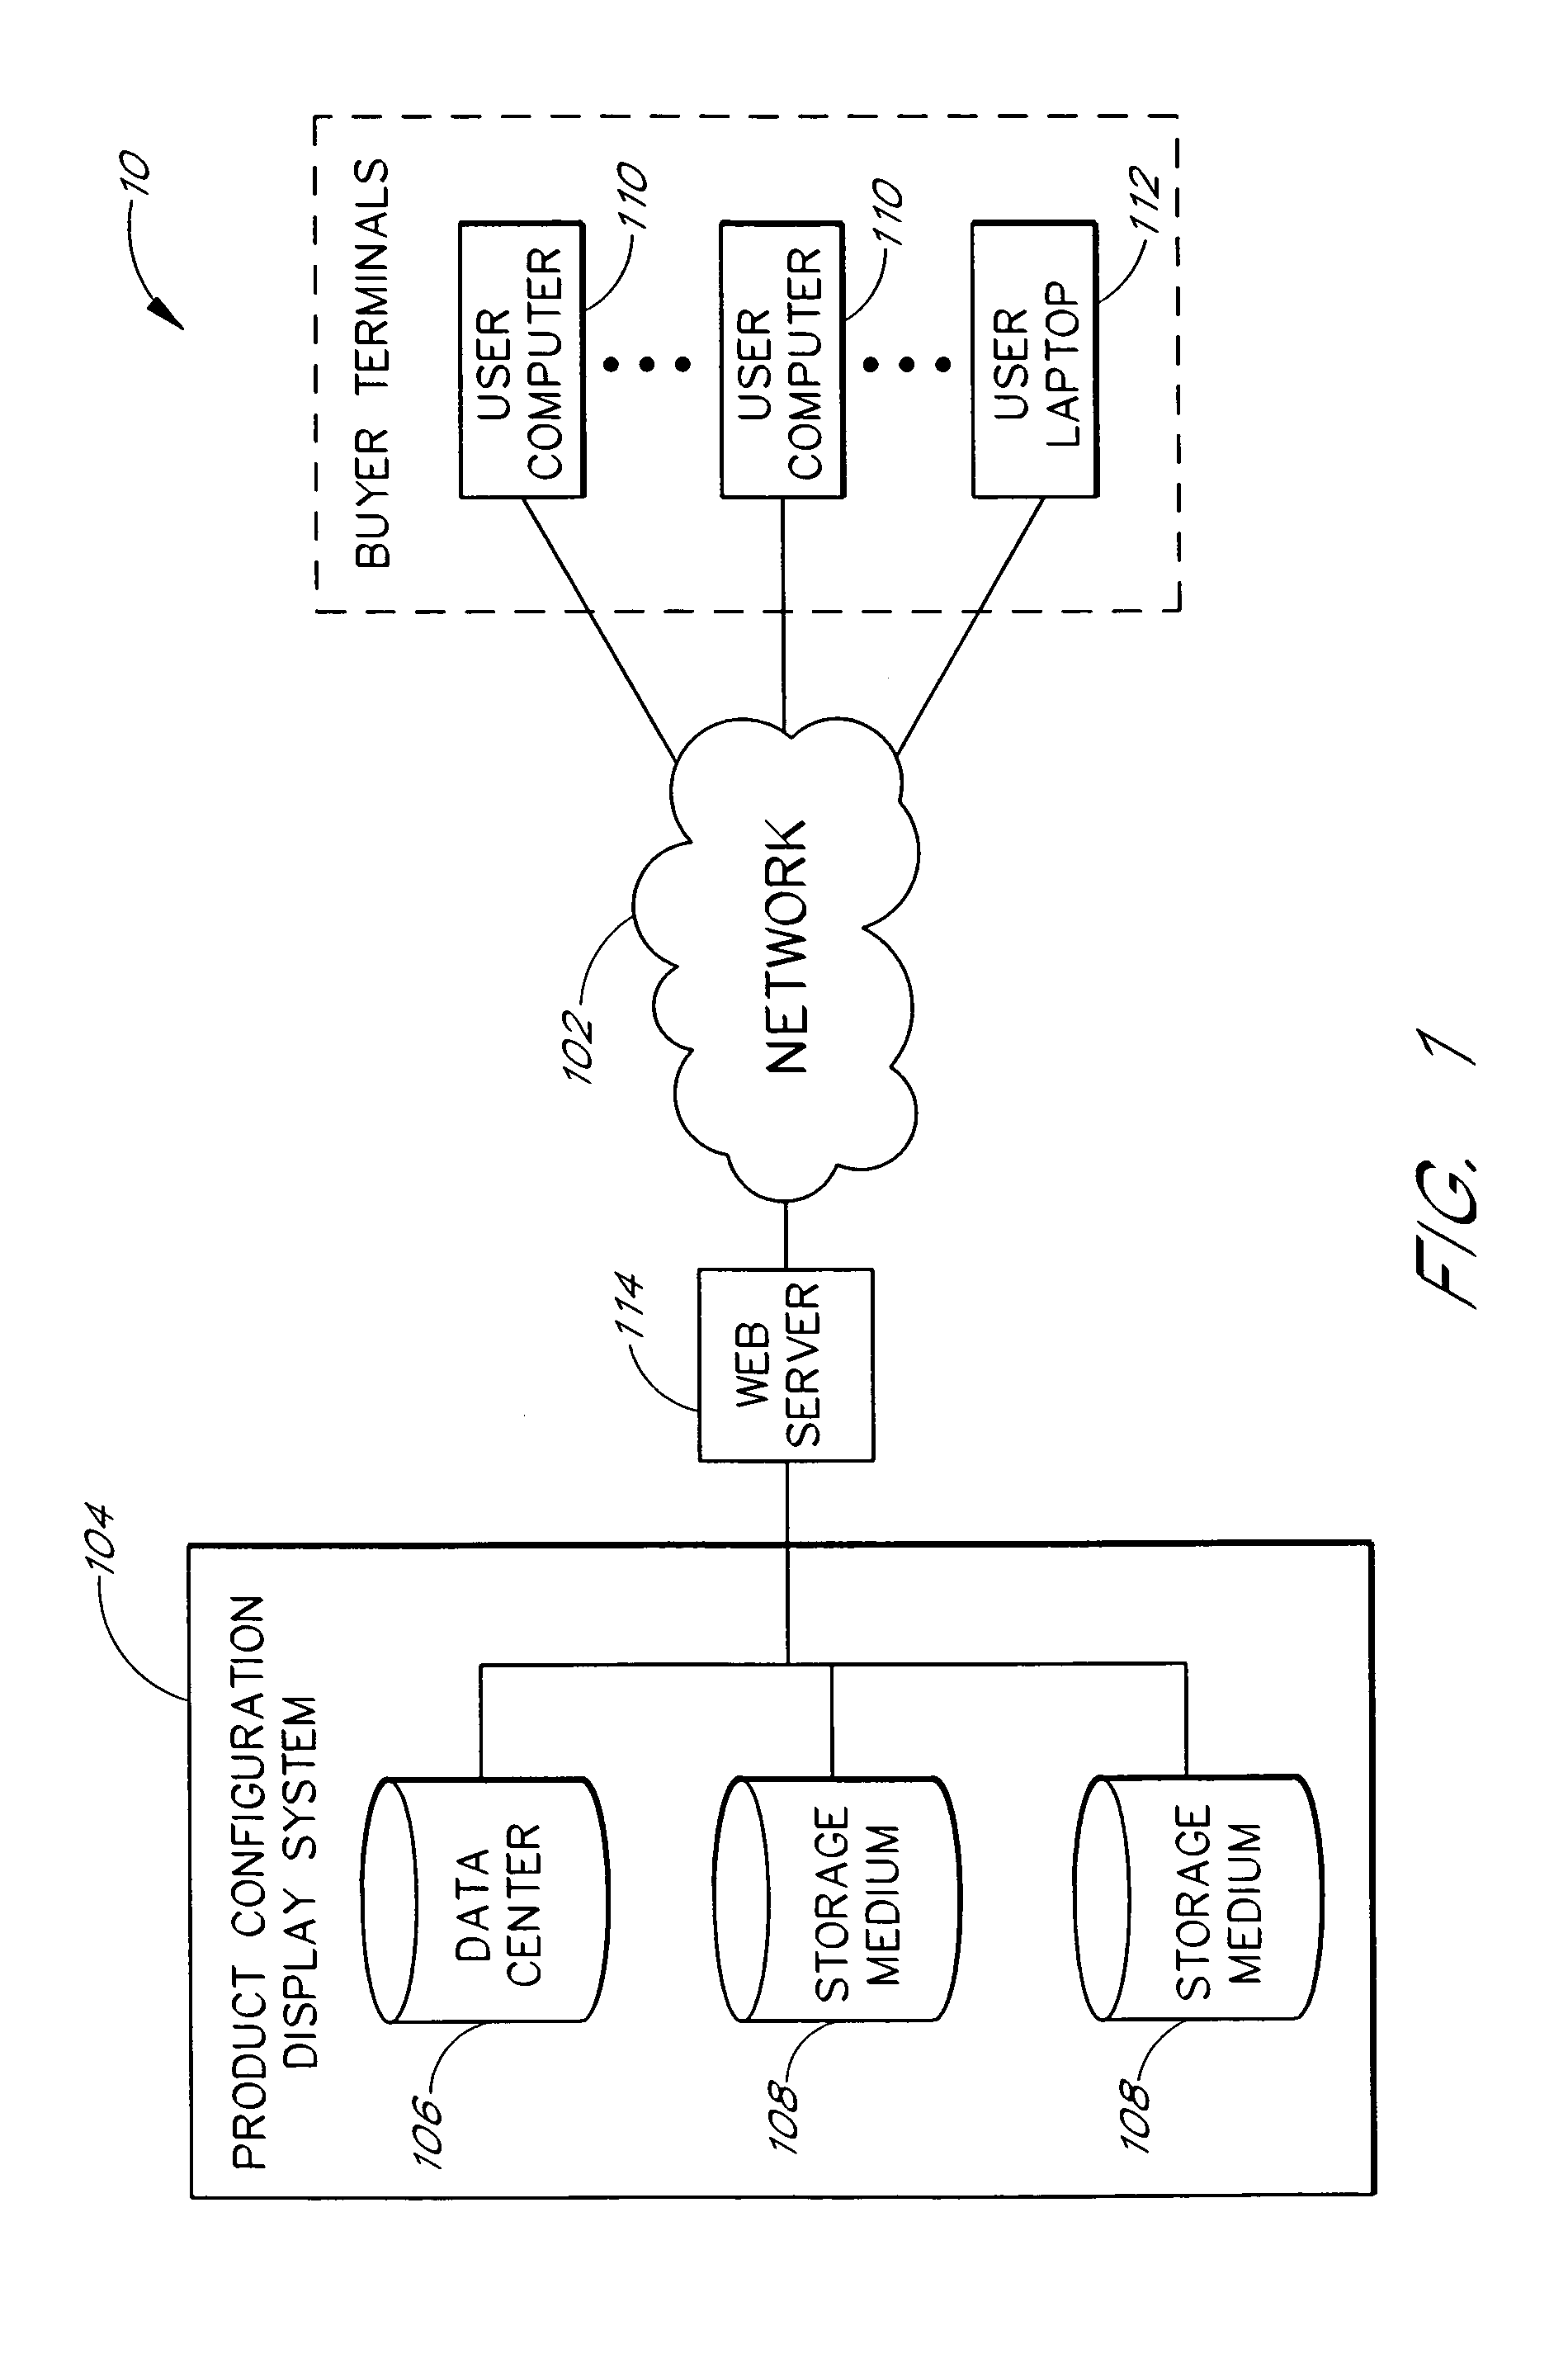 Product configuration display system and method with user requested physical product alterations